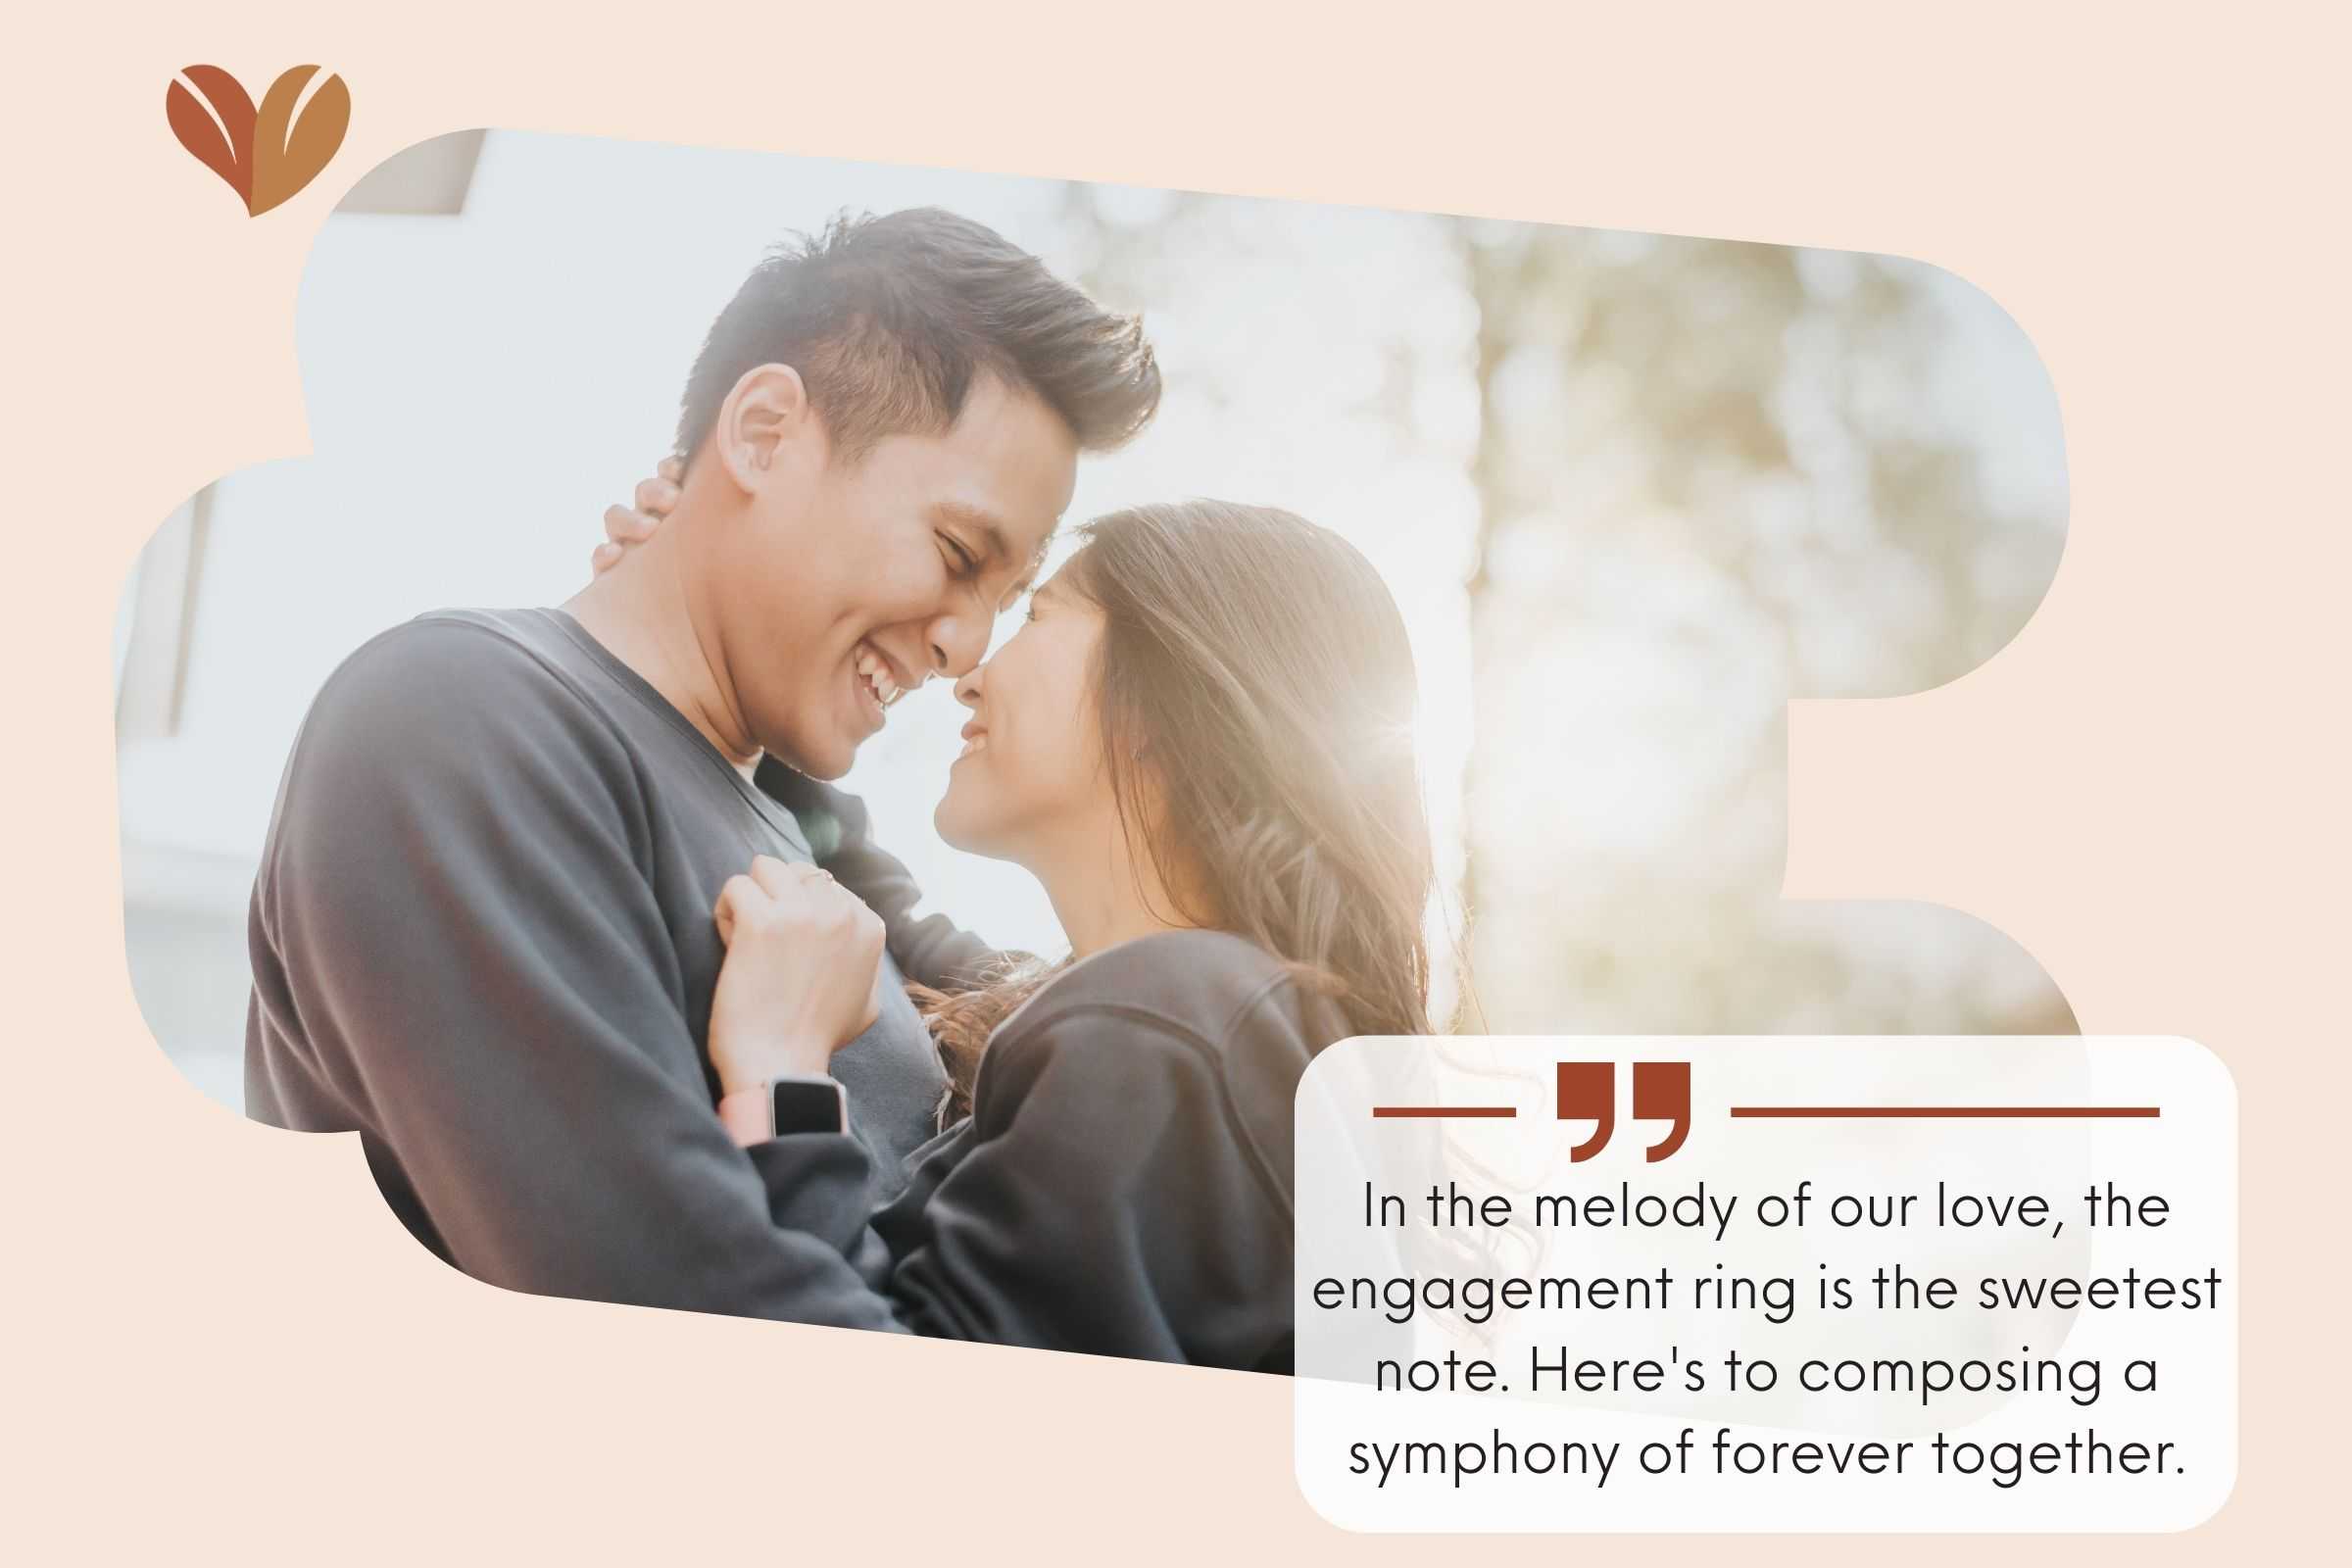 In the melody of our love, the engagement ring is the sweetest note. Here's to composing a symphony of forever together.